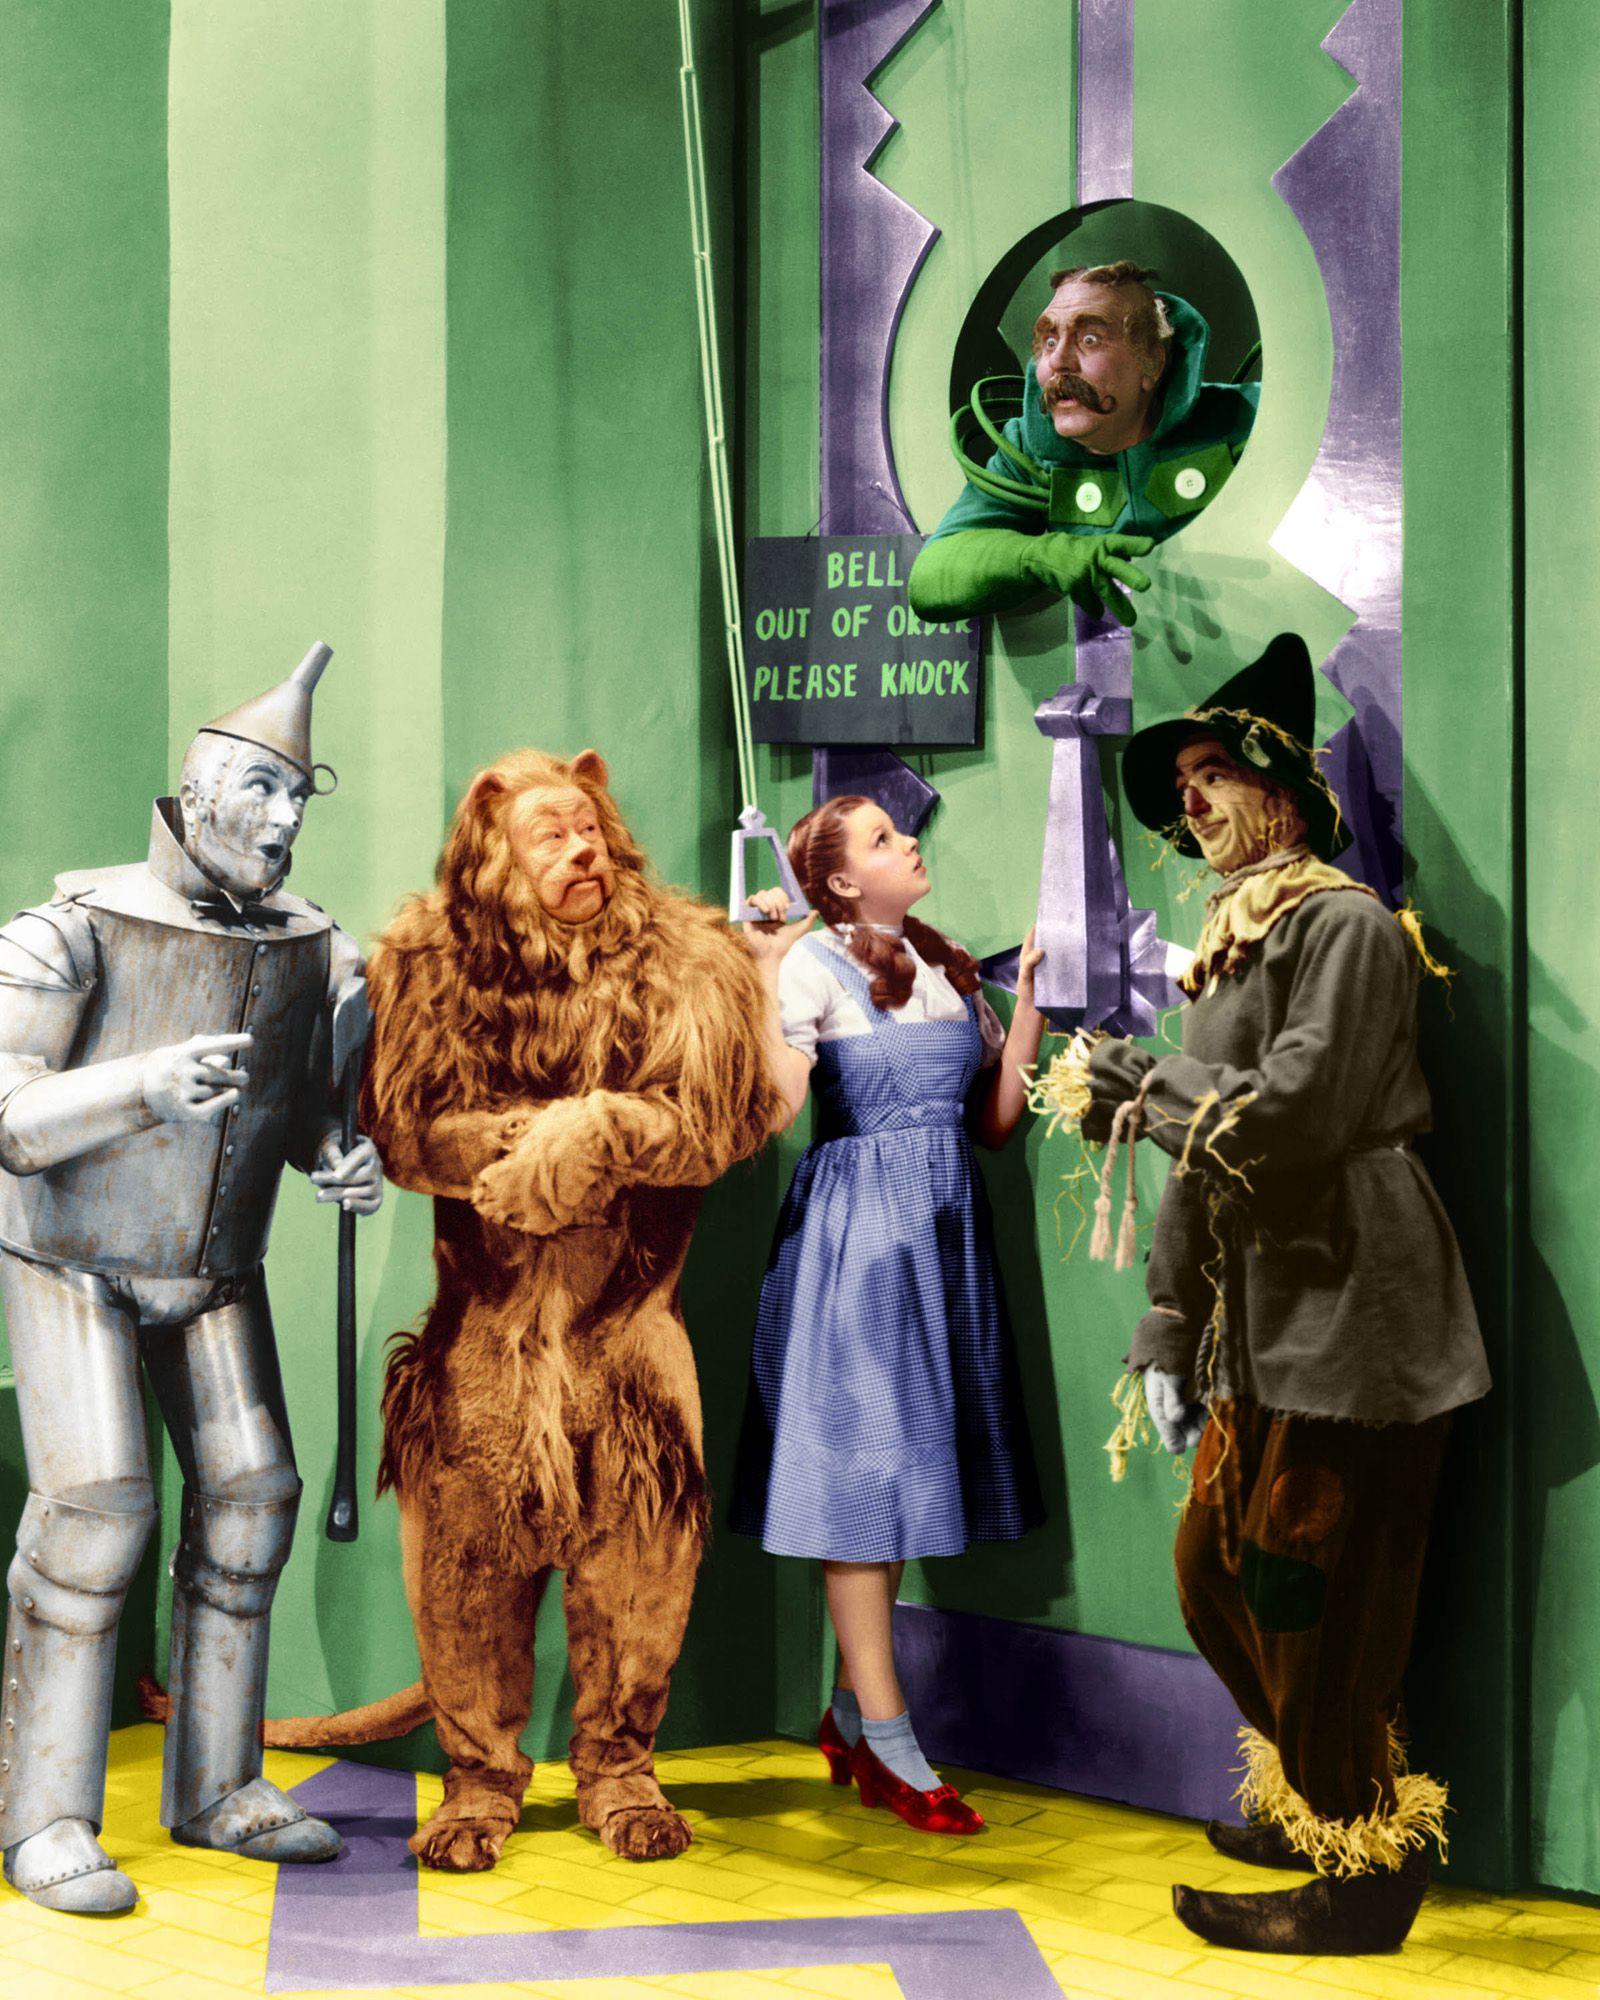 At the Throne Room of the Wizard of Oz the Brain of E.C